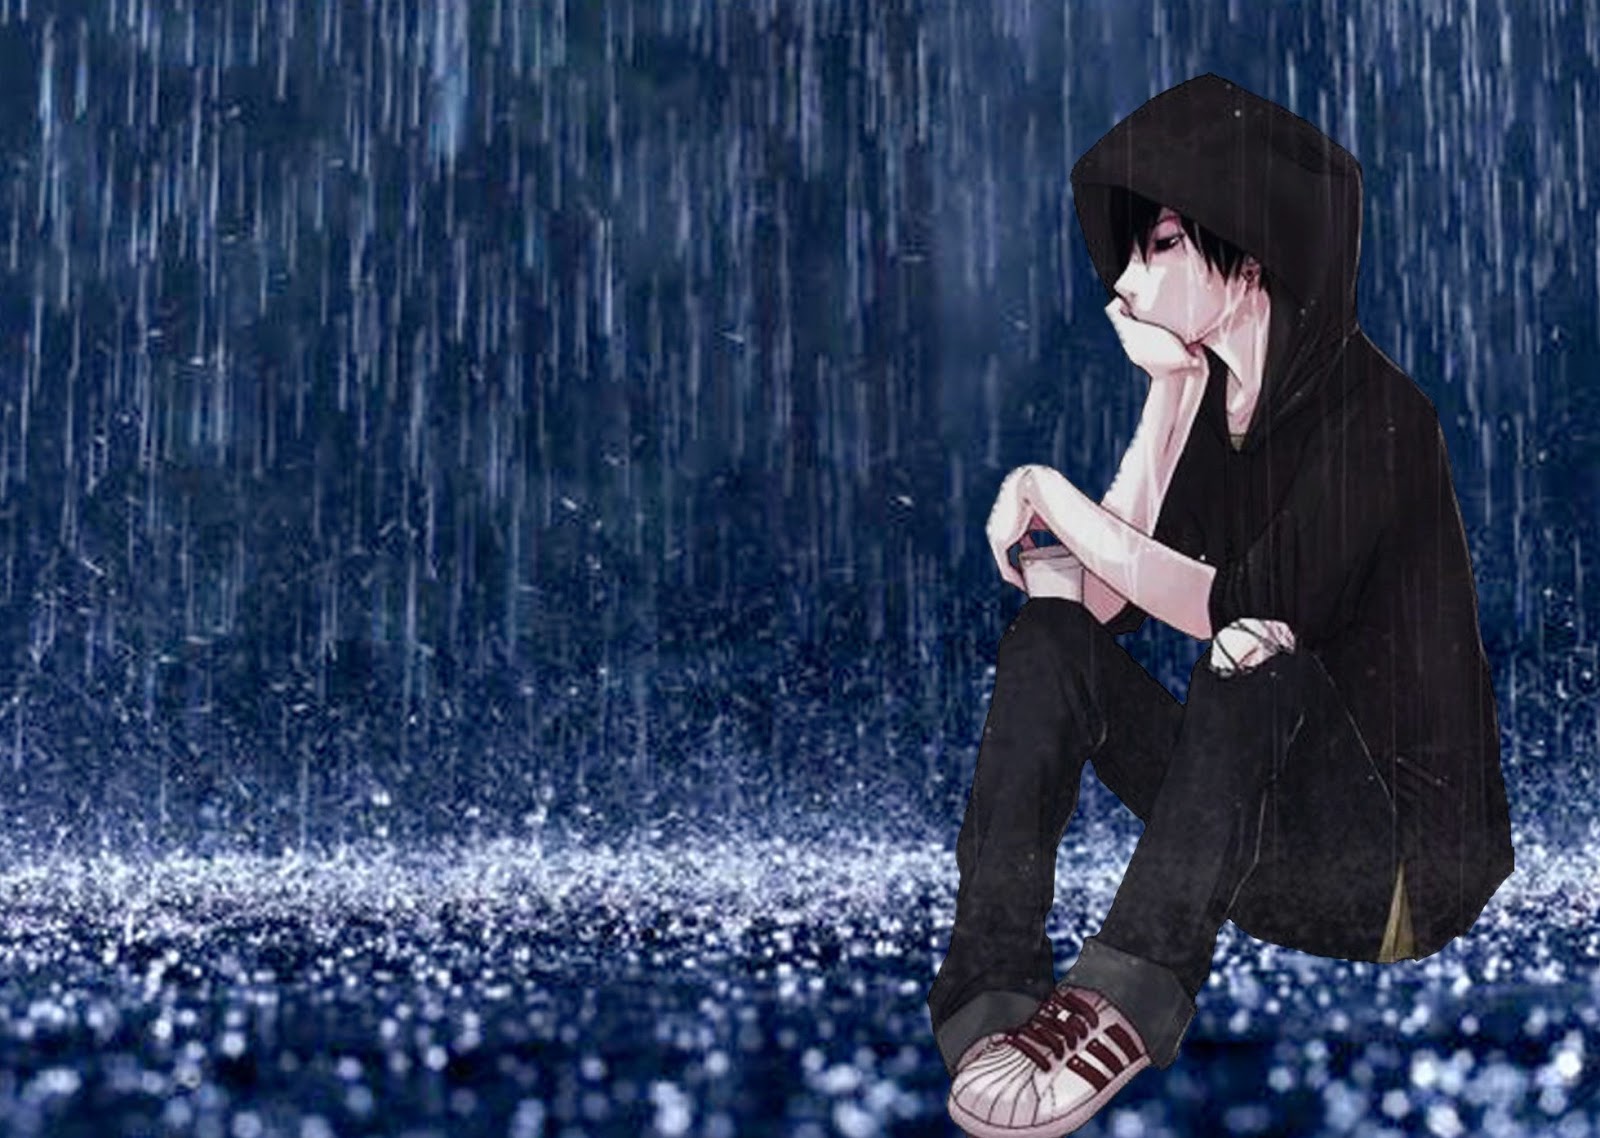 Alone Boy HD Wallpaper and Images Boy in rain